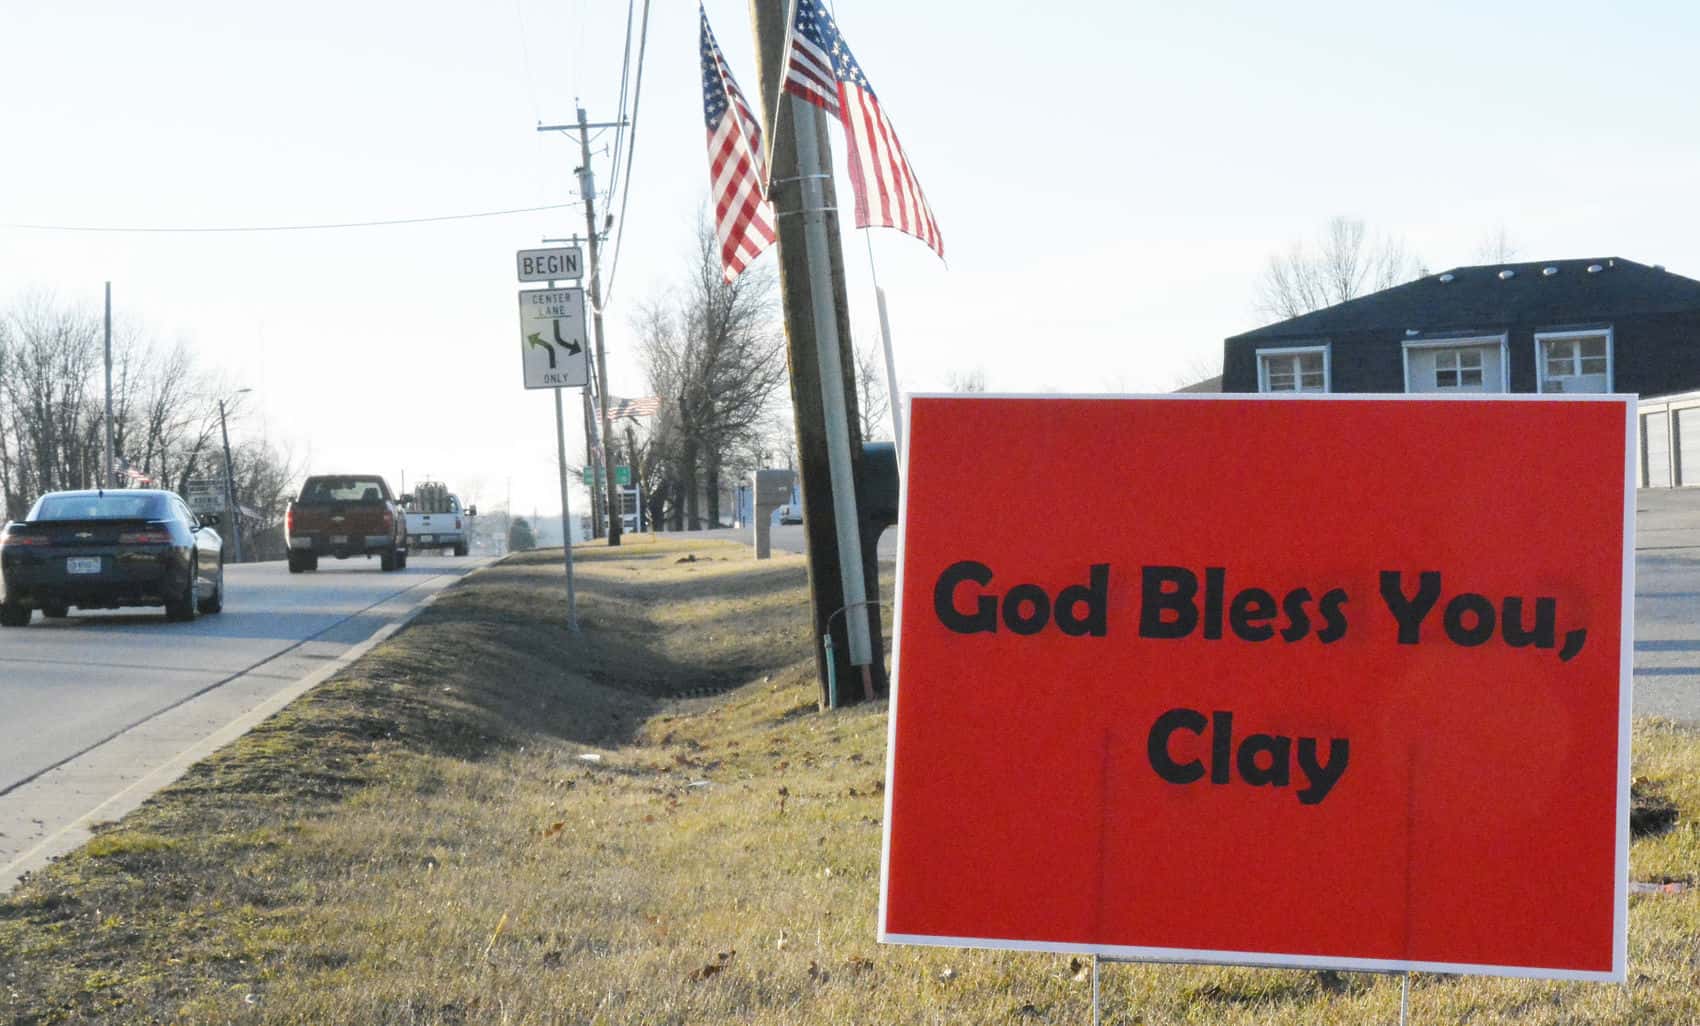 lt-clay-cullen-funeral-route-sign-on-67-in-bicknell-from-vsc-story-on-013118